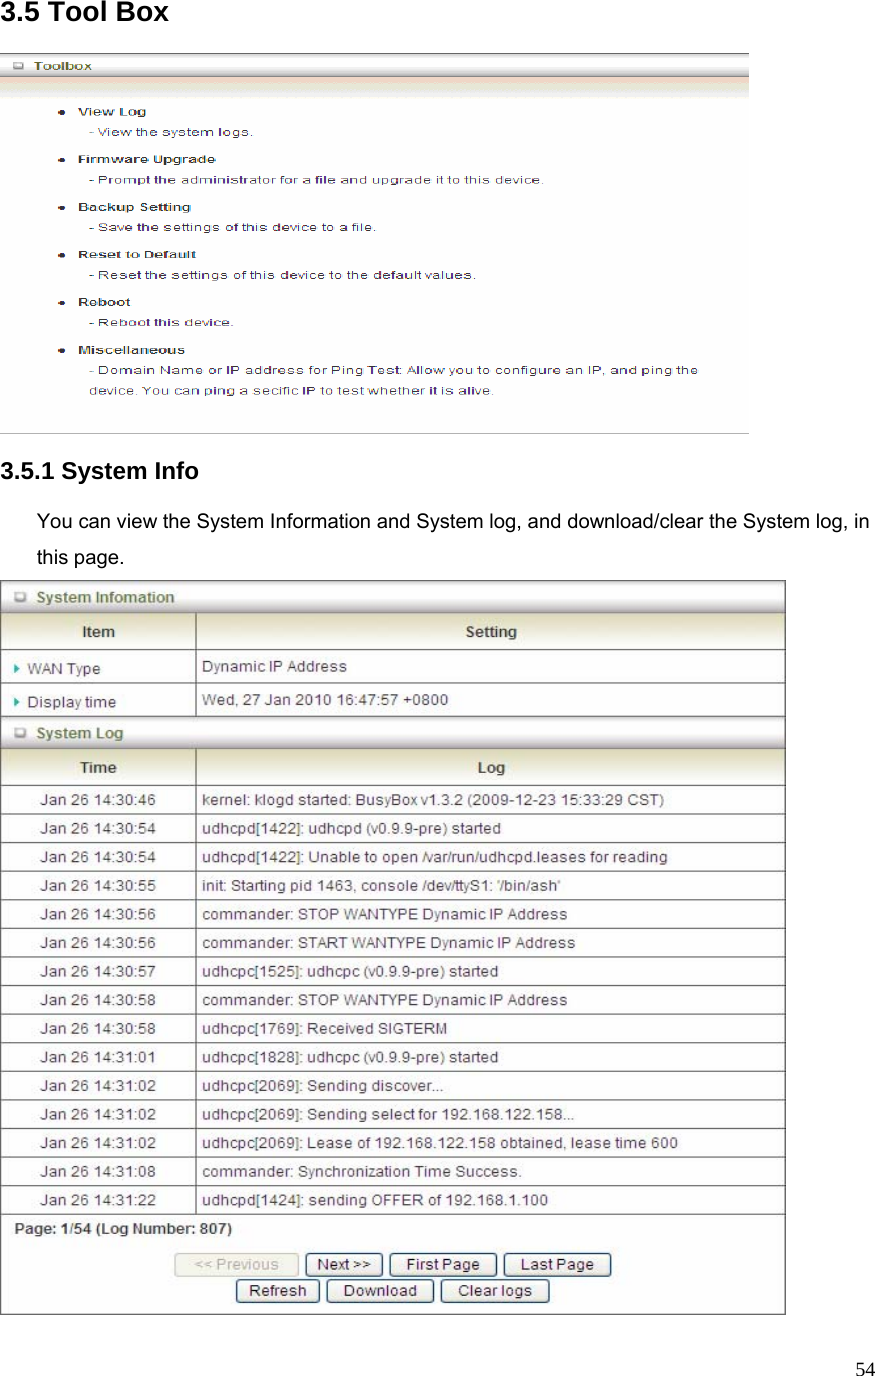  543.5 Tool Box    3.5.1 System Info  You can view the System Information and System log, and download/clear the System log, in this page.  